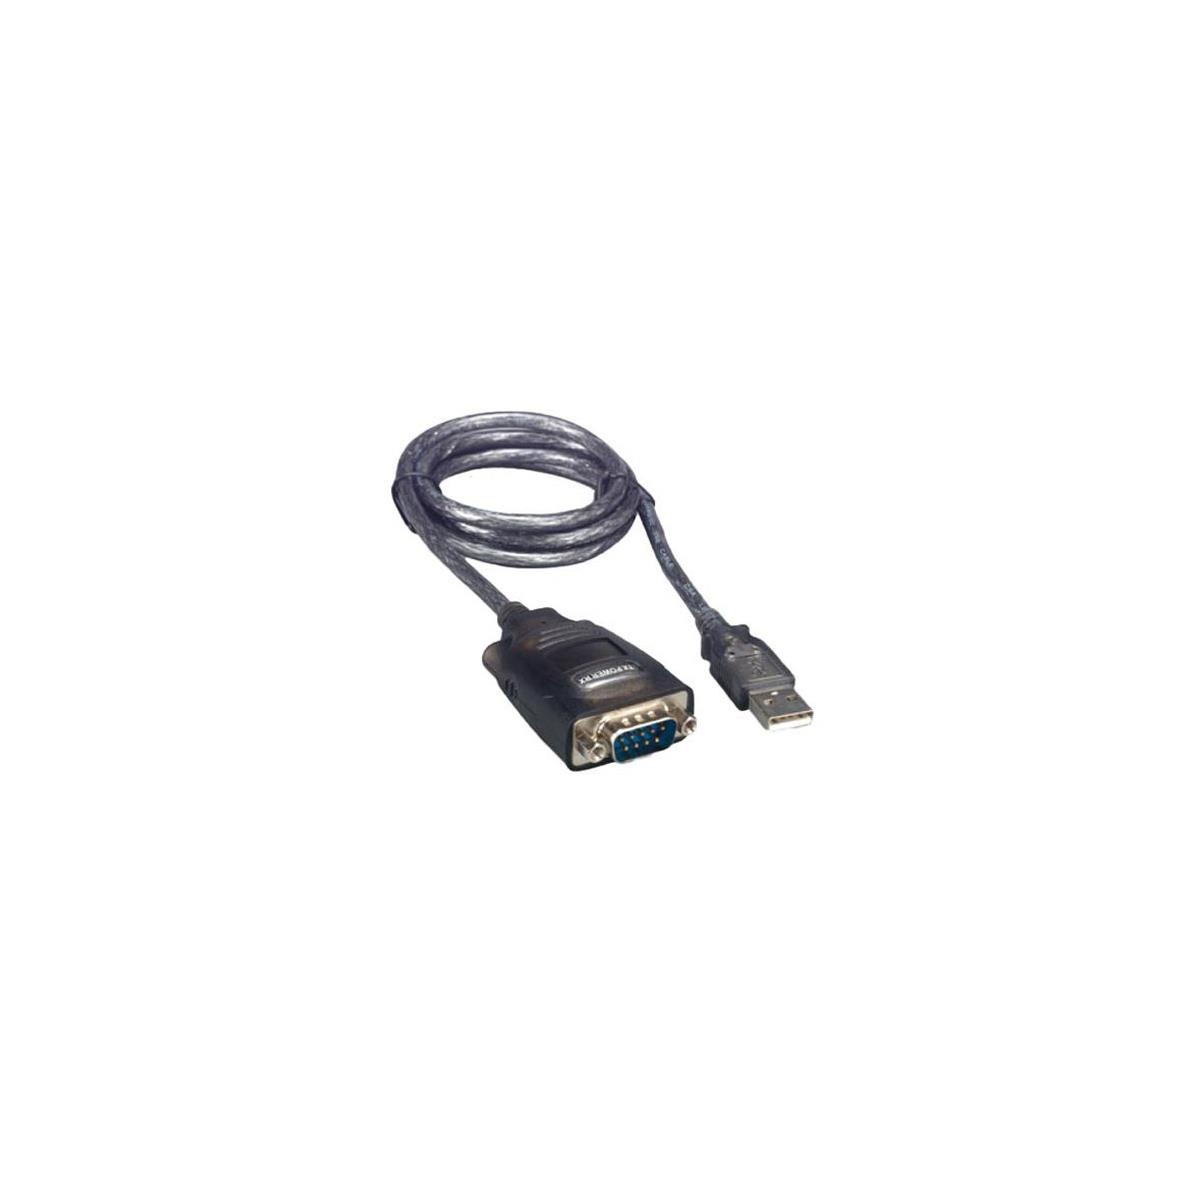 Photos - Other for Computer Comprehensive 3' USB A Male to Db9 Male Cable USBA-DB9M 